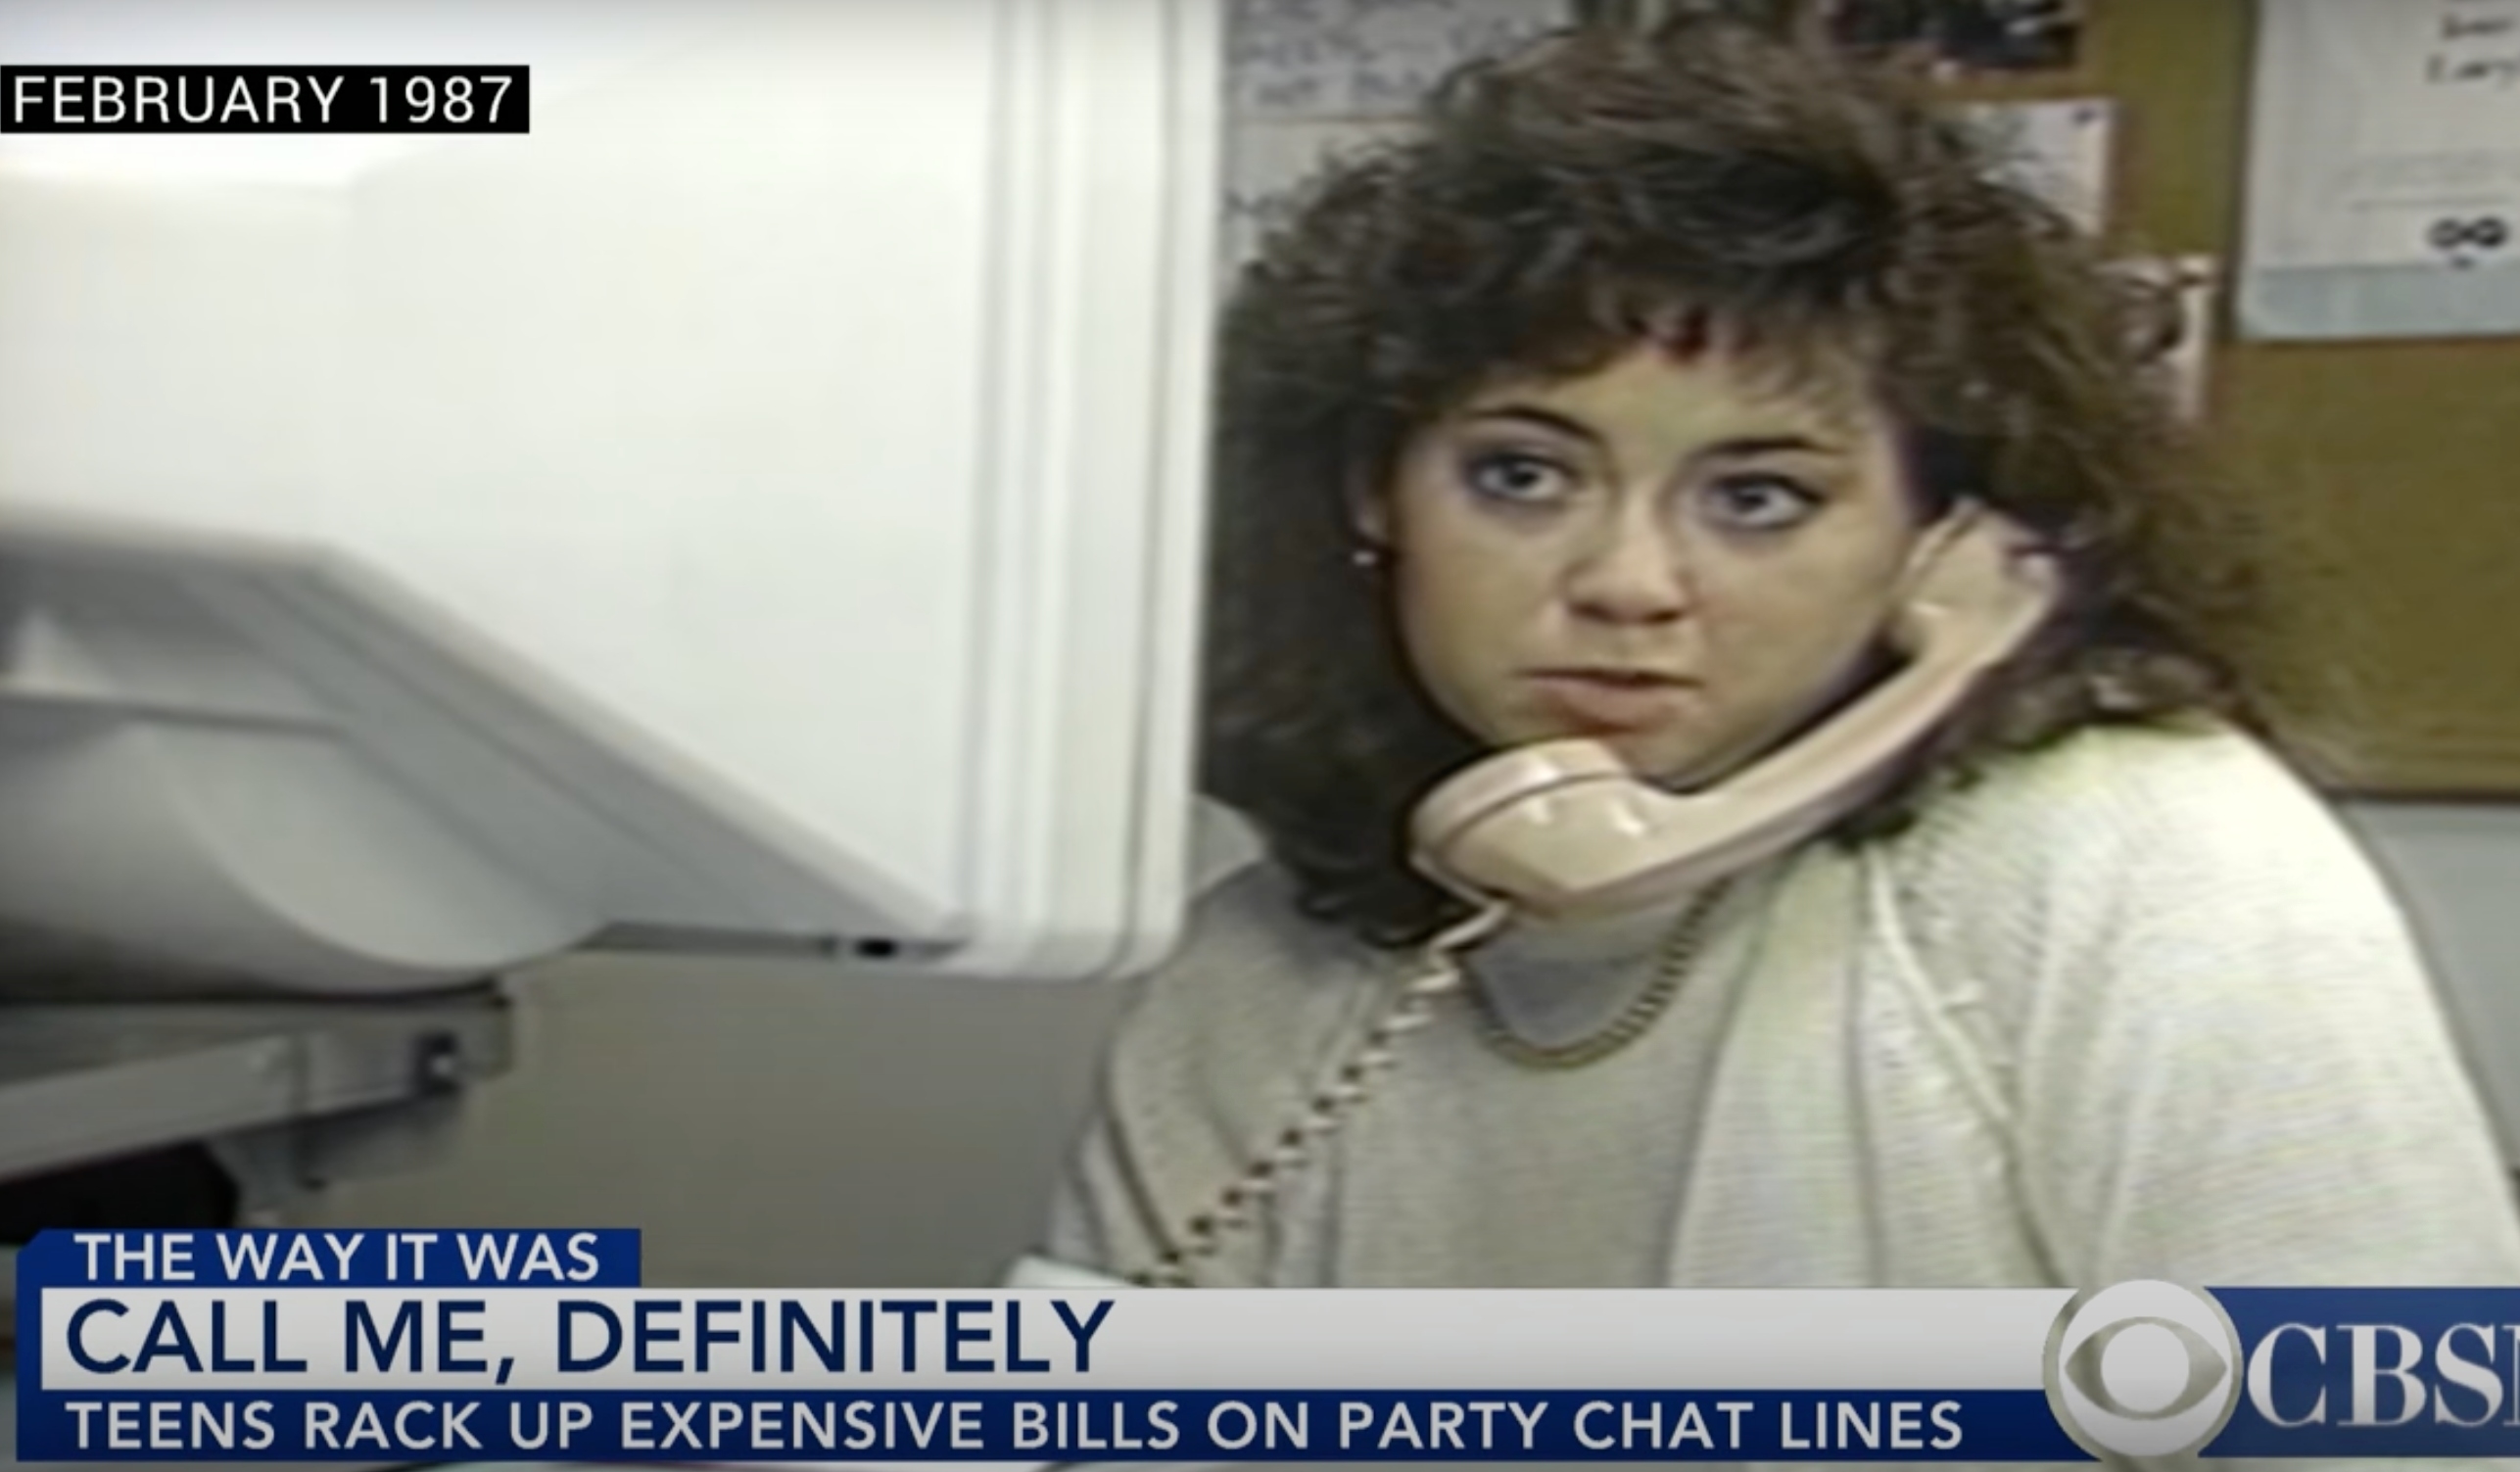 A teenager from the &#x27;80s is talking on a corded phone while being featured on the news. The headline reads, &quot;Call me, definitely. Teens rack up expensive bills on party chat lines&quot;